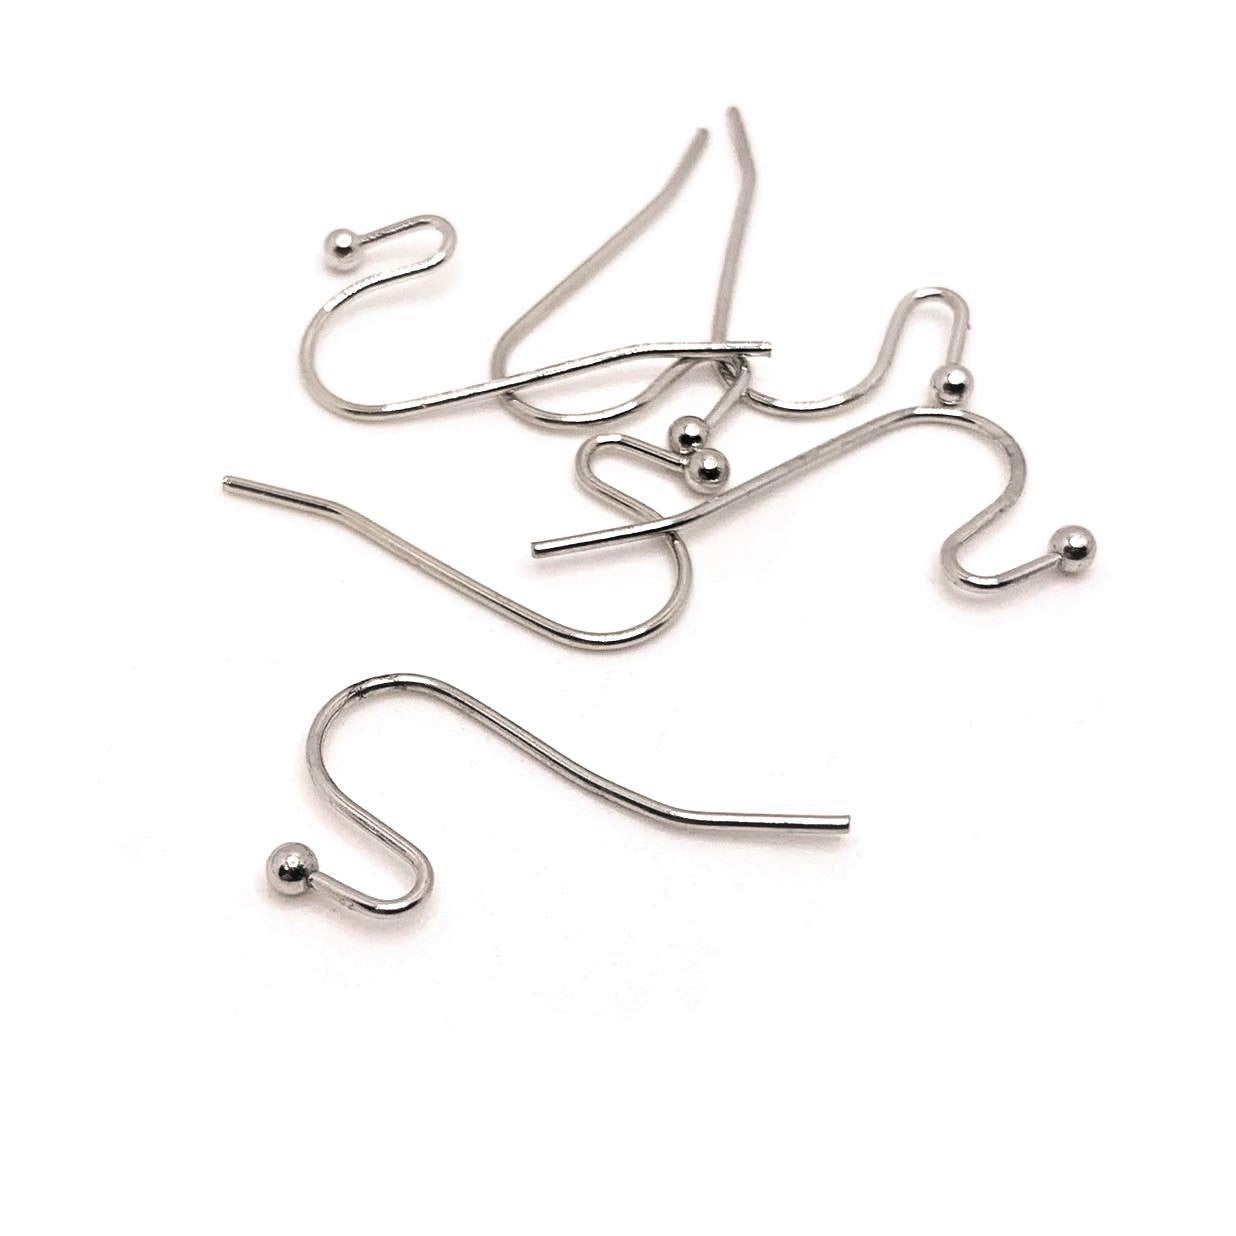 100 or 500 Pieces: Antique Silver Rhodium Shepherd Fish Hook Earring Wires